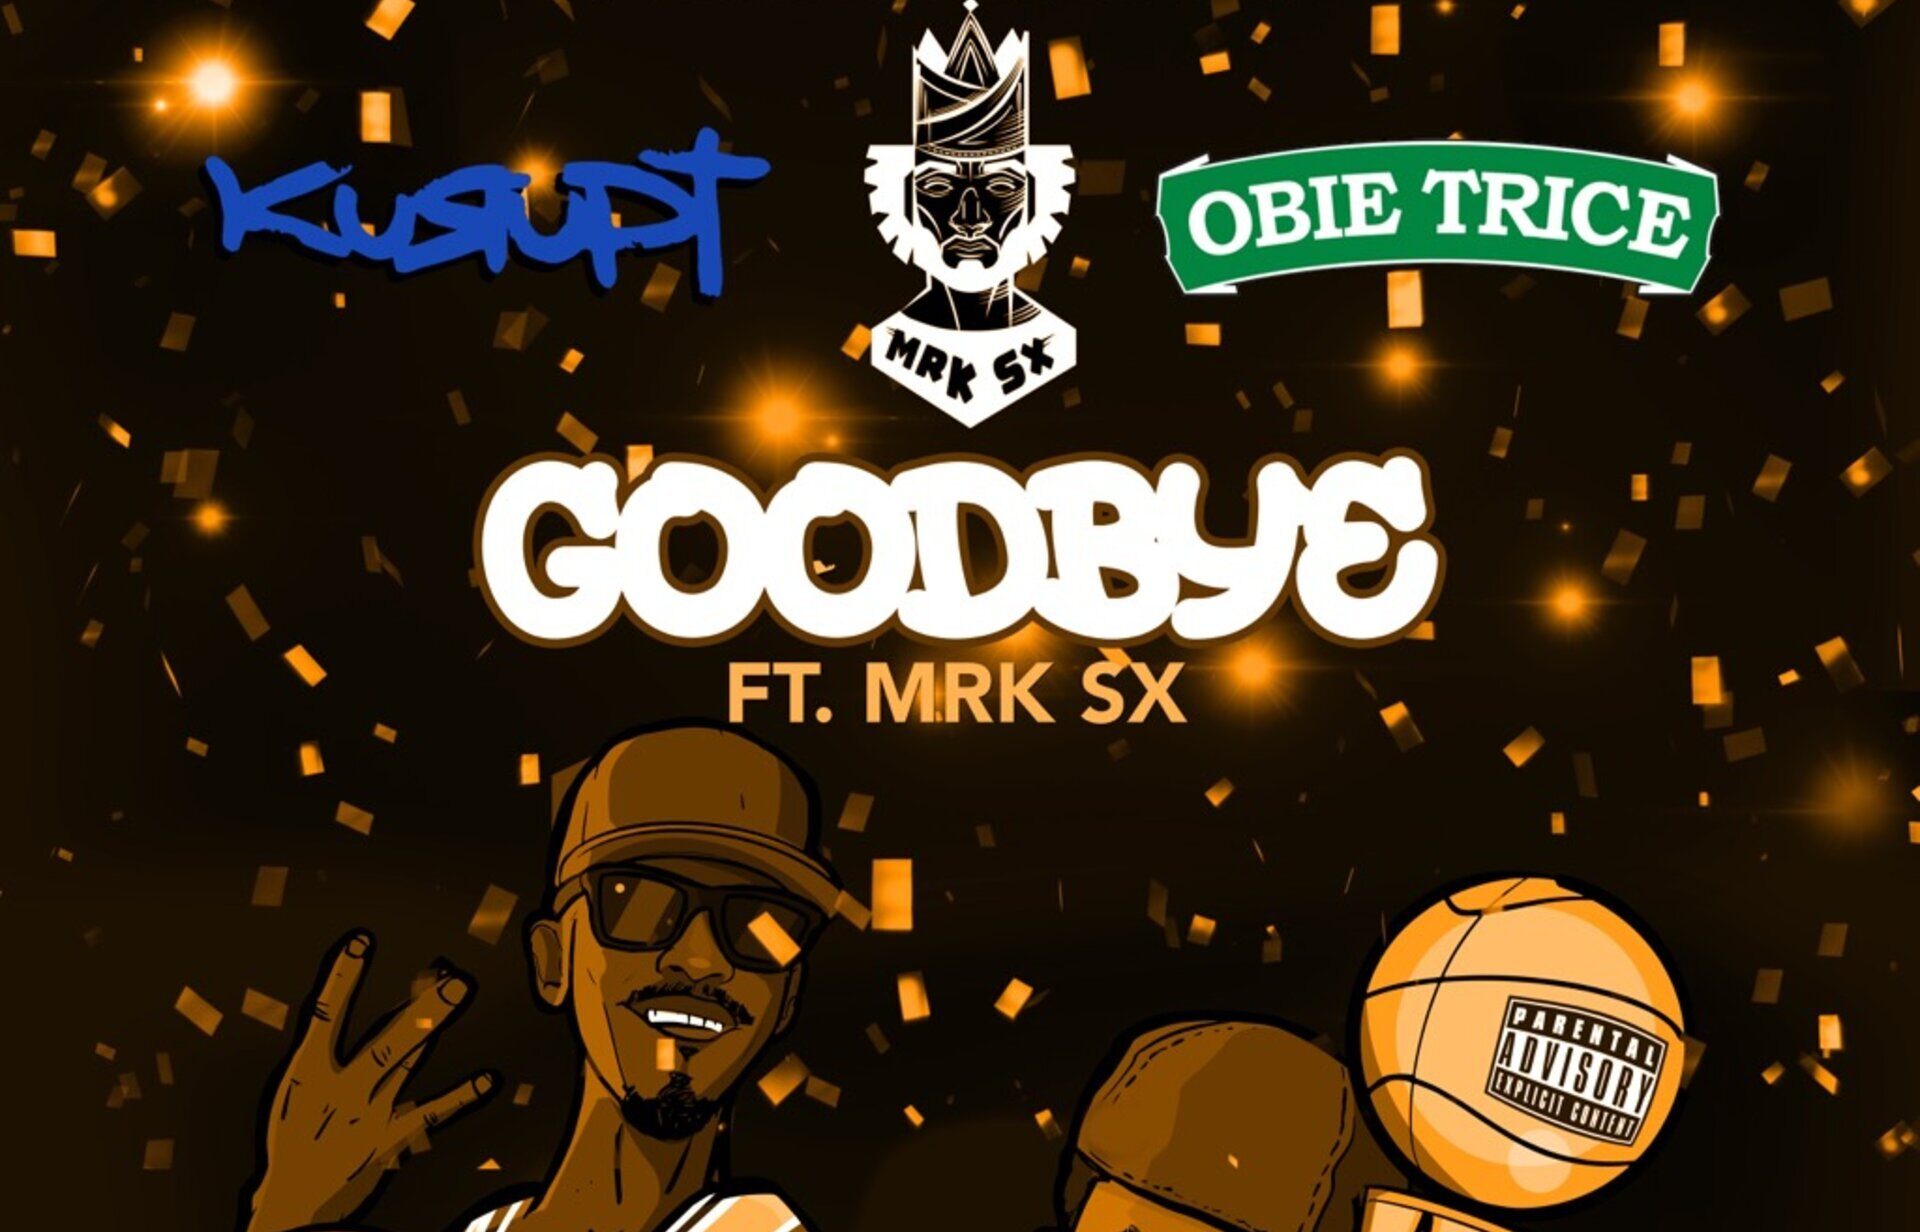 Kurupt and Obie Trice Keep it Real about Relationships on "Goodbye" Featuring MRK SX